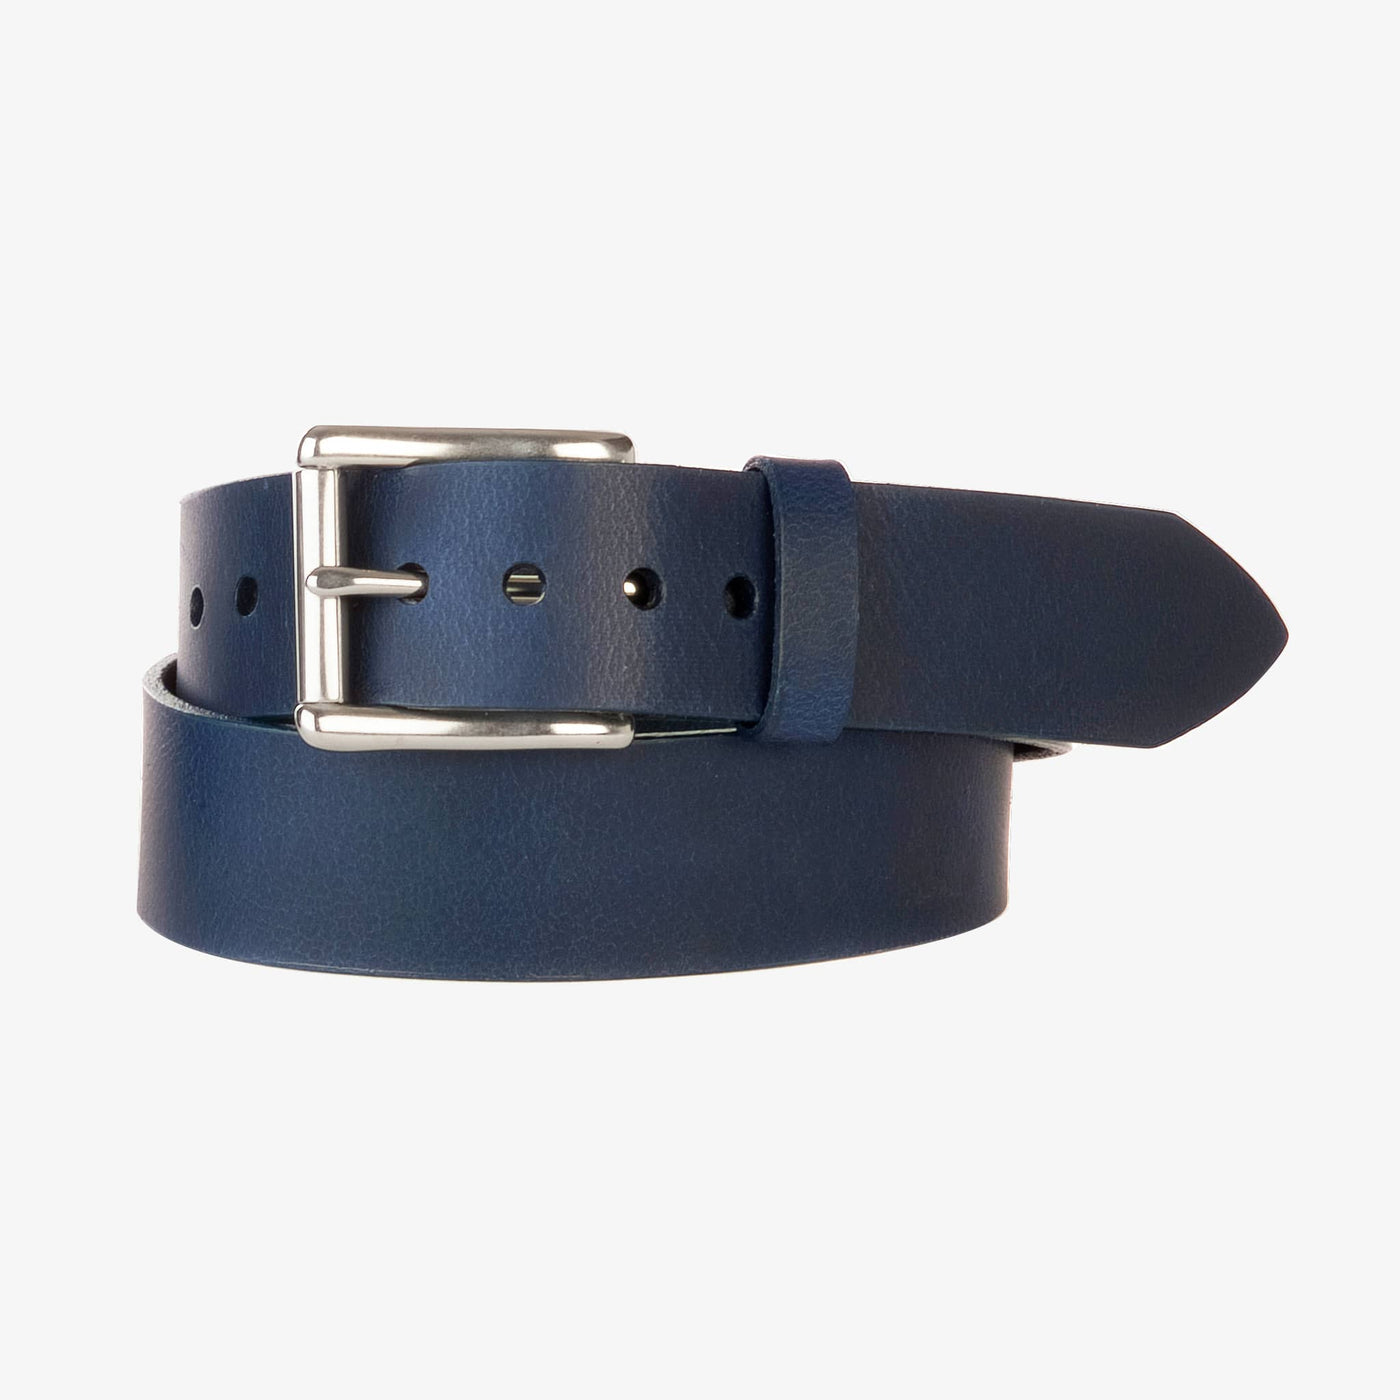 Classic Bridle Leather Belt BRAVE Leather Belt -- Custom Made for You